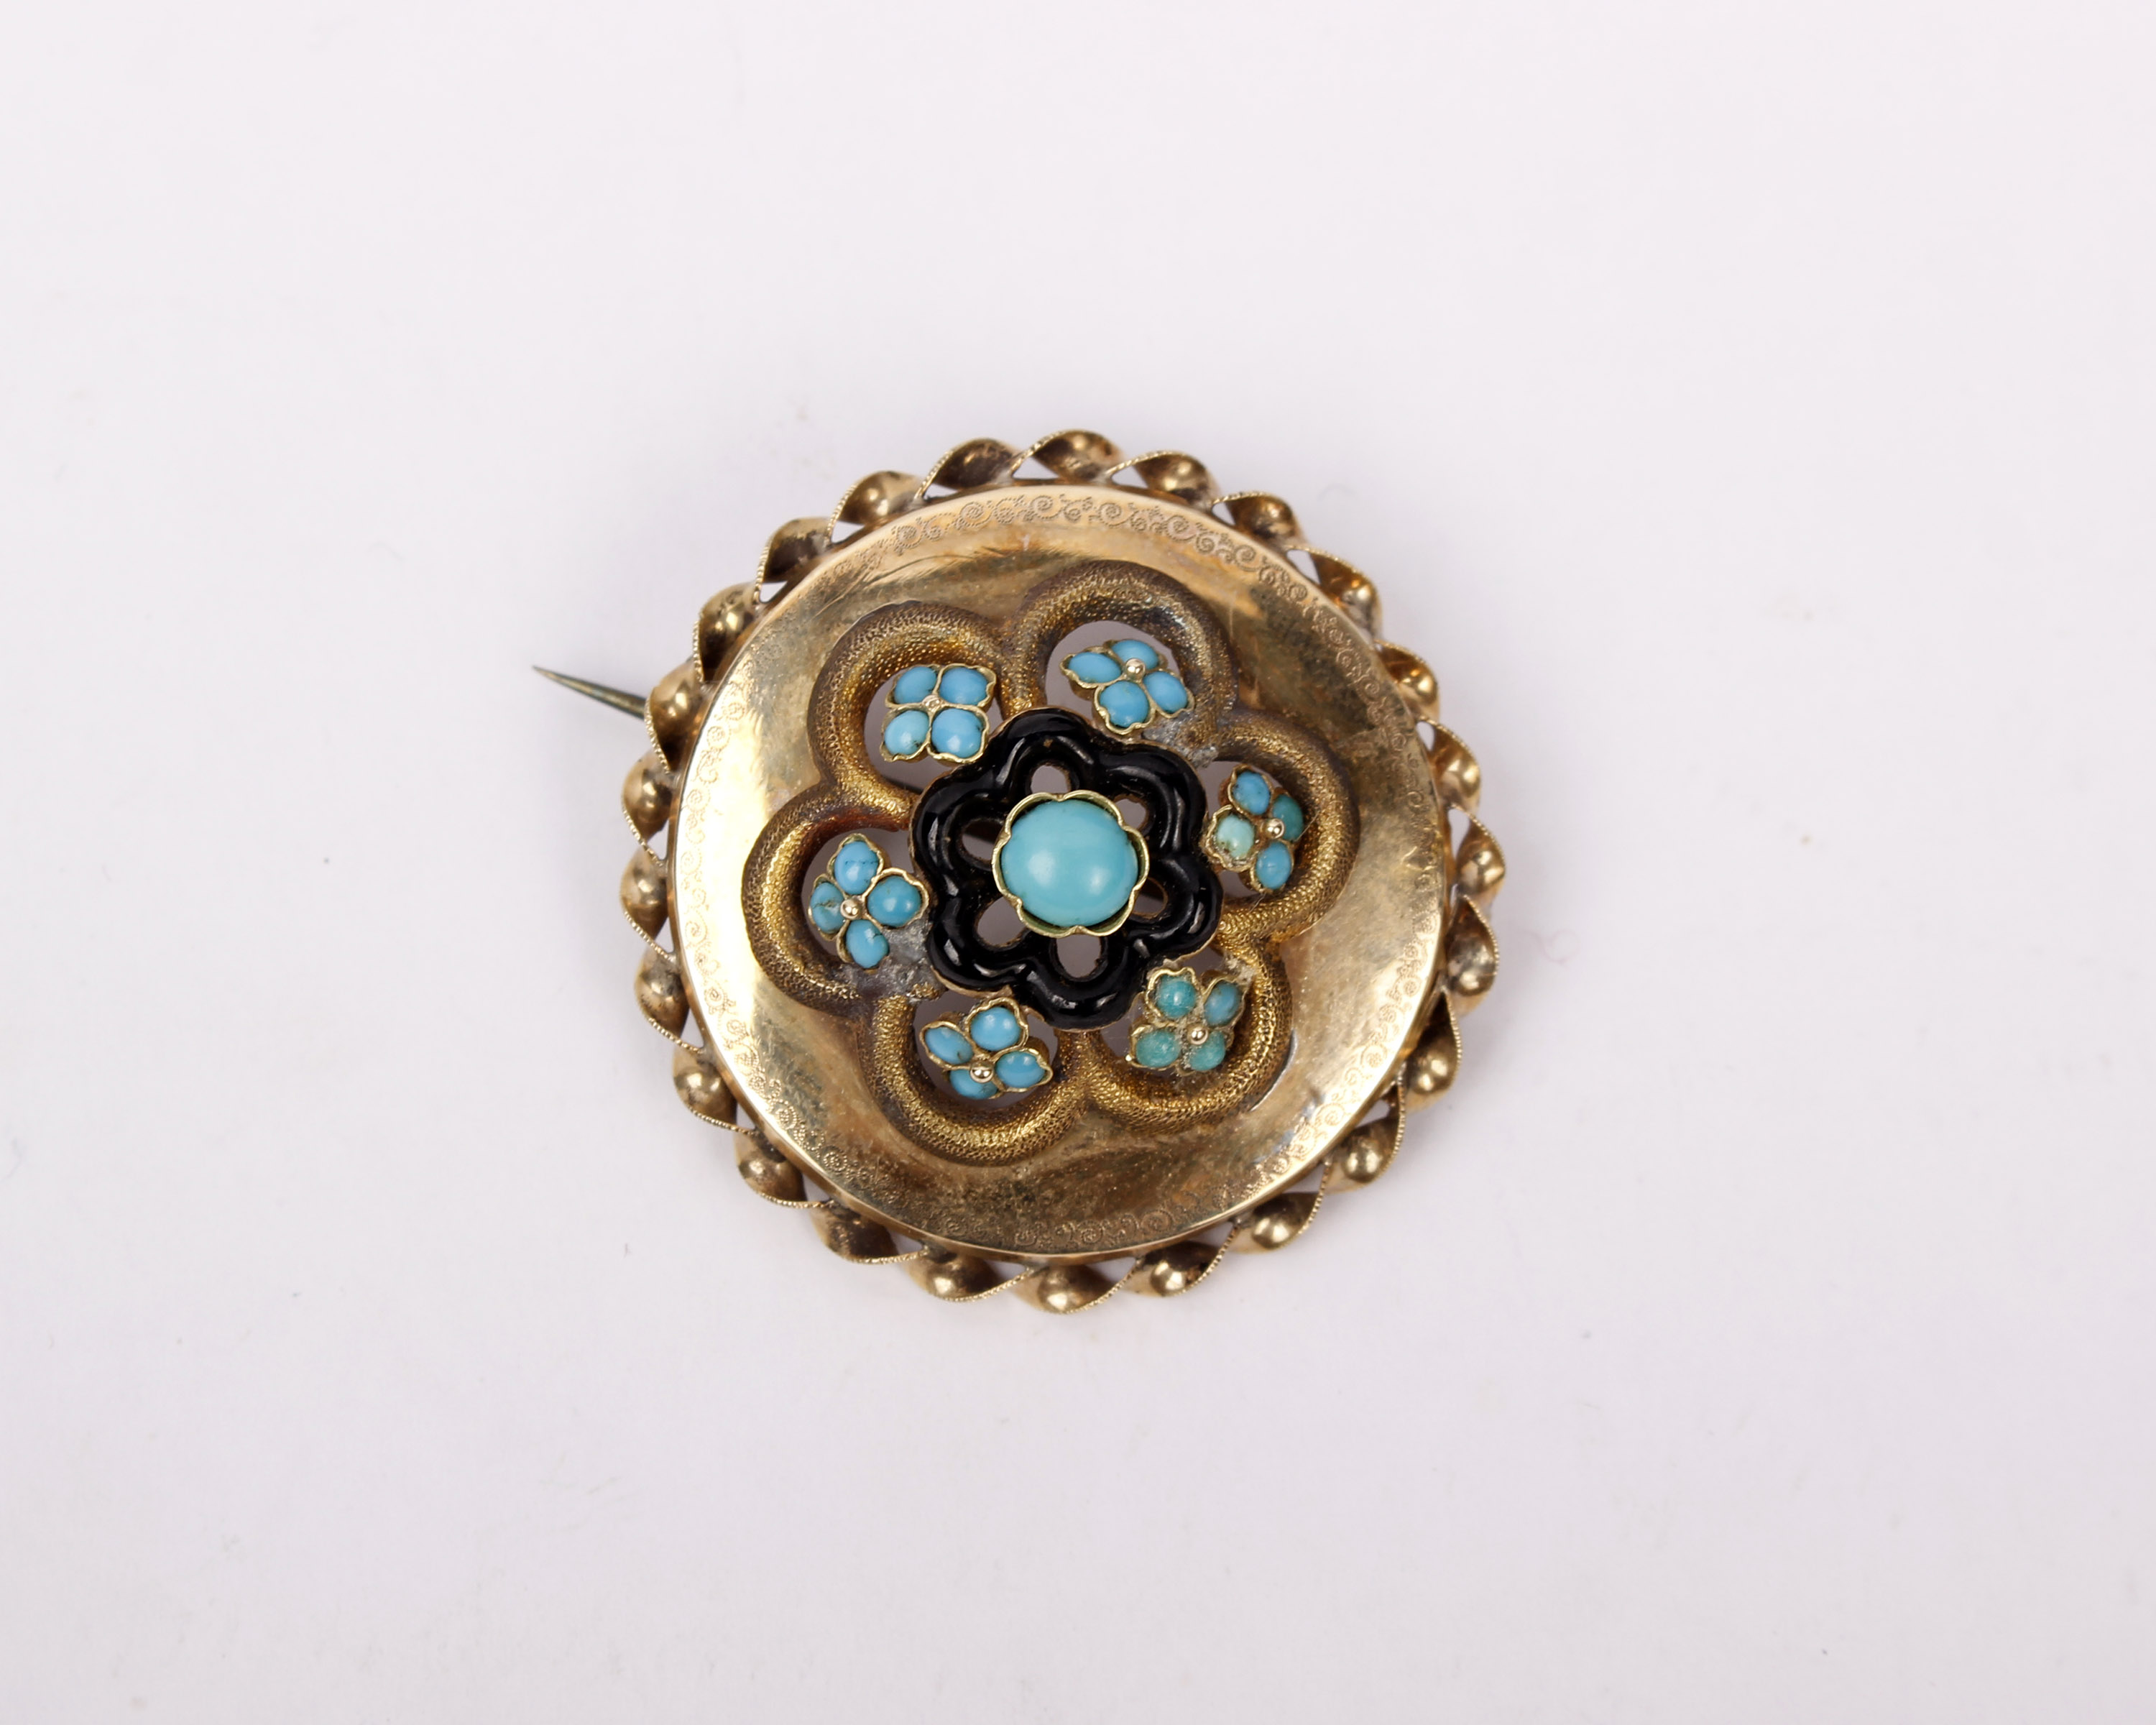 An unmarked yellow metal 19th century Etruscan style wheel brooch set with turquoise cabochons and